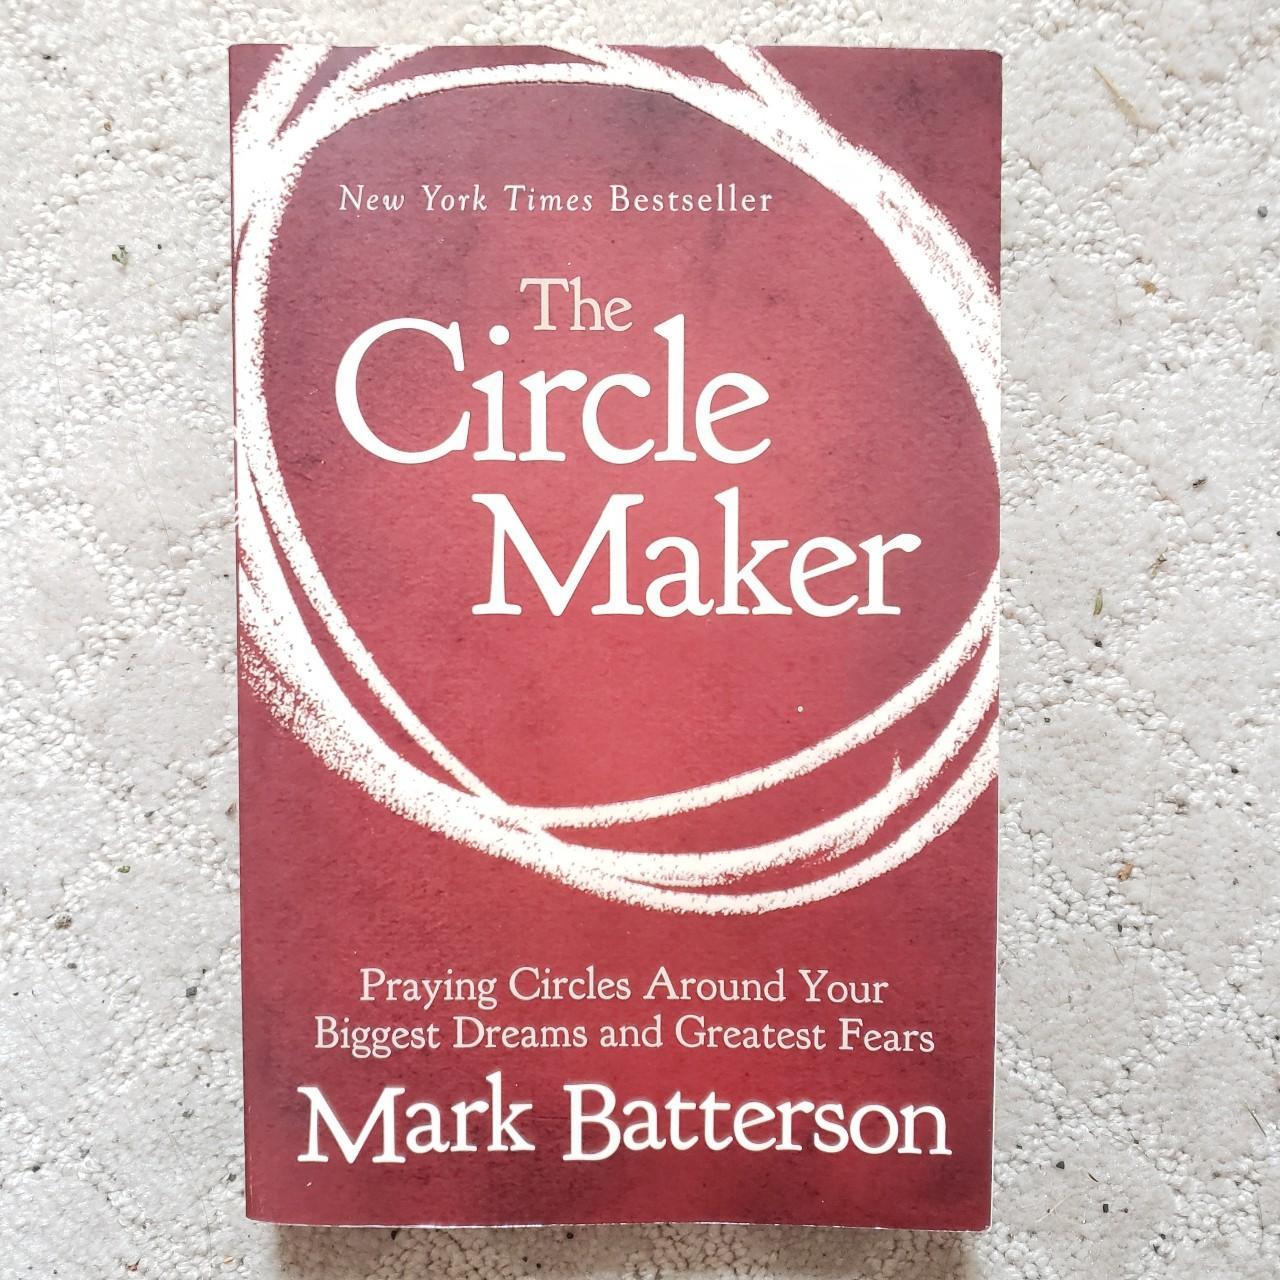 The Circle Maker: Praying Circles Around Your Biggest Dreams and Greatest  Fears (Exclusive Edition)